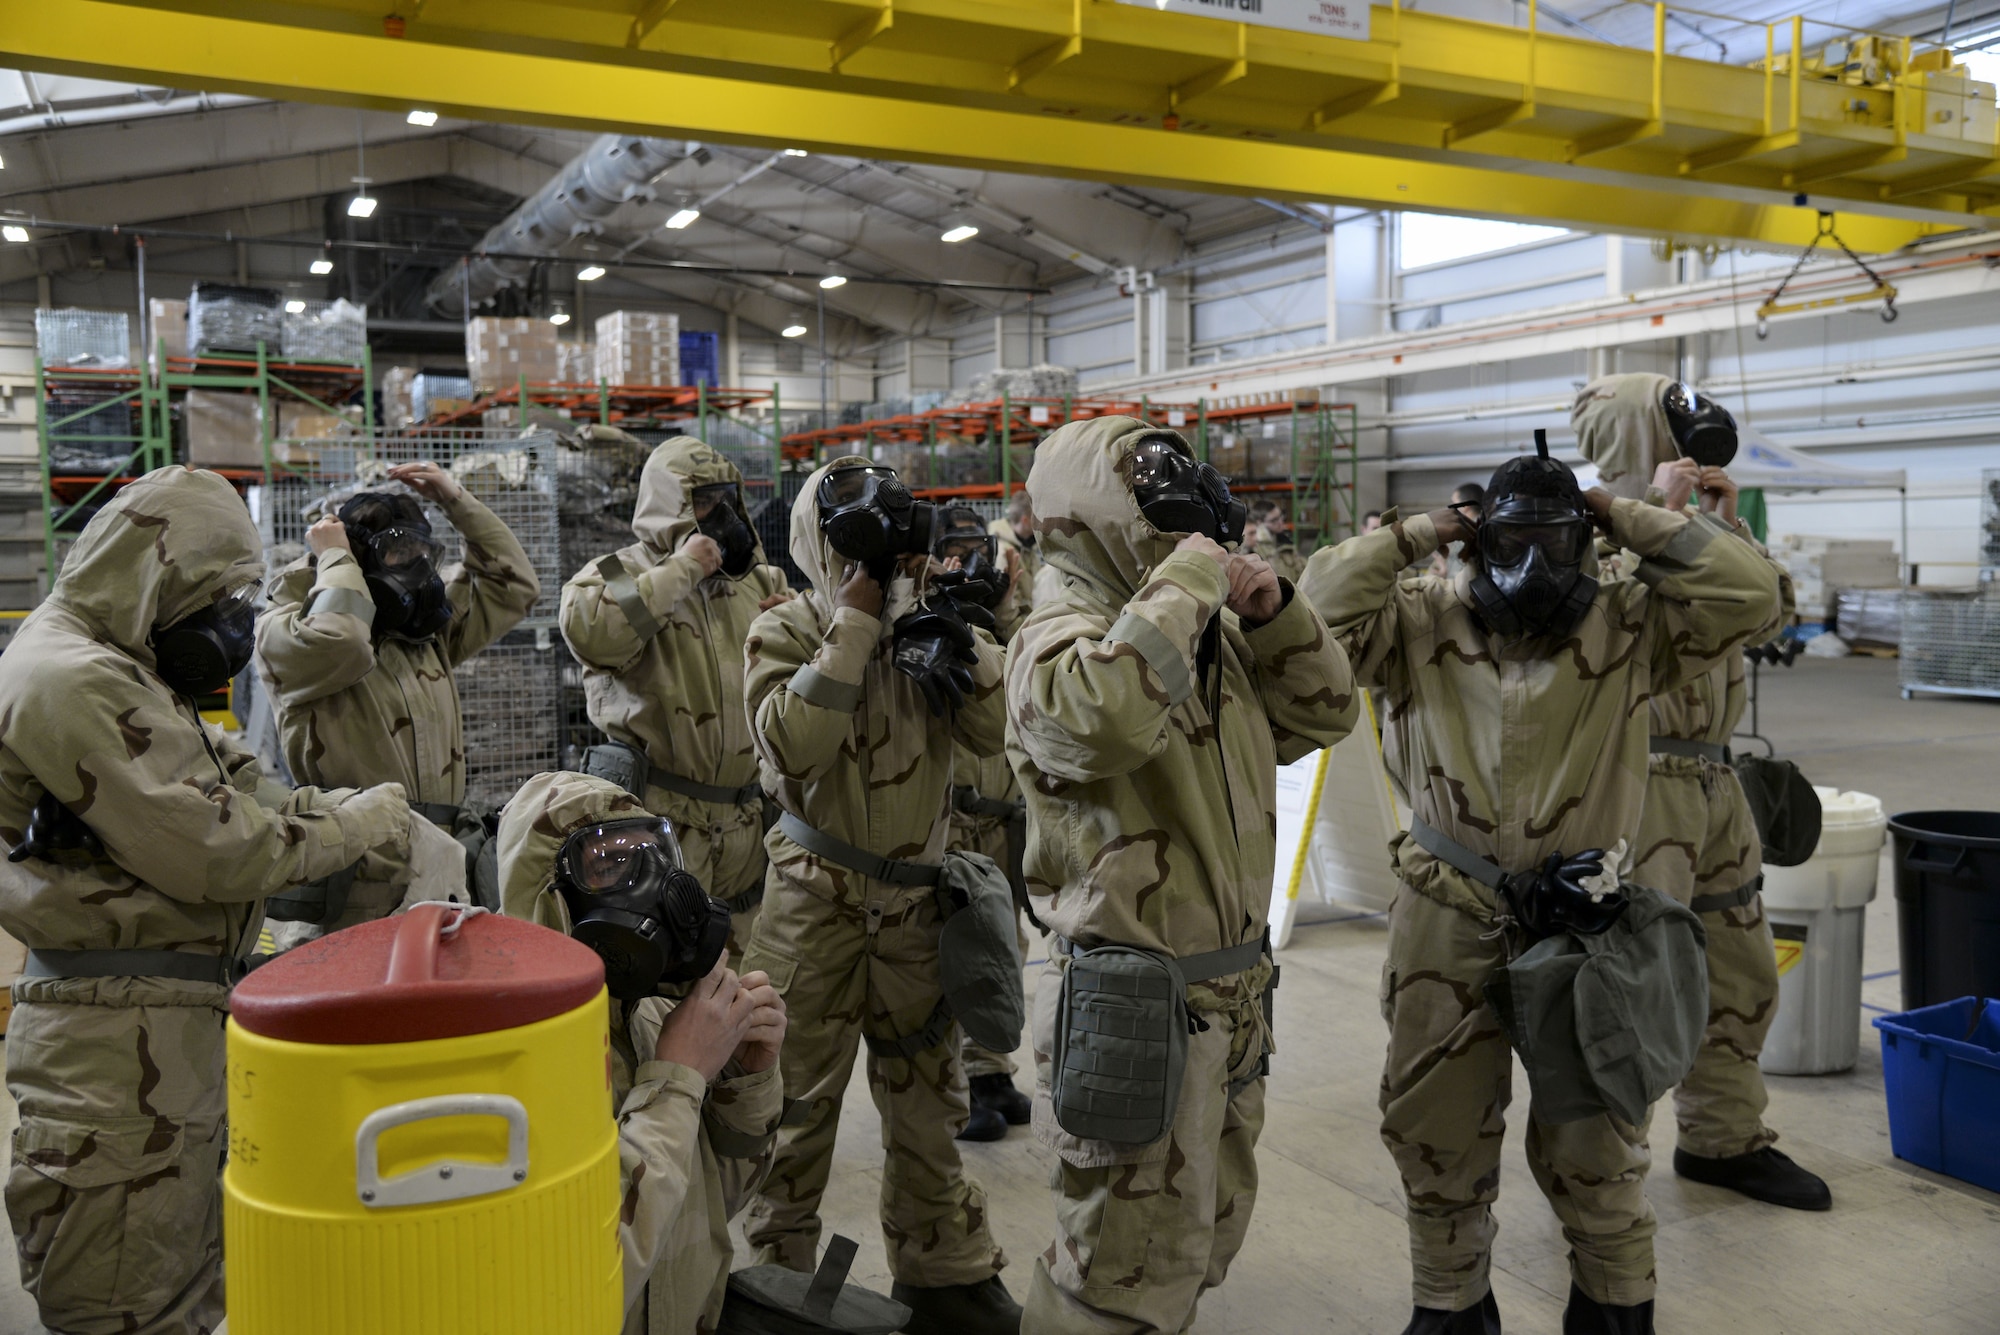 Team Dover Airmen don Mission Oriented Protective Posture, also known as MOPP gear, during a Chemical, Biological, Radiological and Nuclear (CBRN) training session Jan. 31, 2018, at Dover Air Force Base, Del. During a chemical attack, service members have only moments to don their individual protective equipment. (U.S. Air Force photo by Staff Sgt. Aaron J. Jenne)